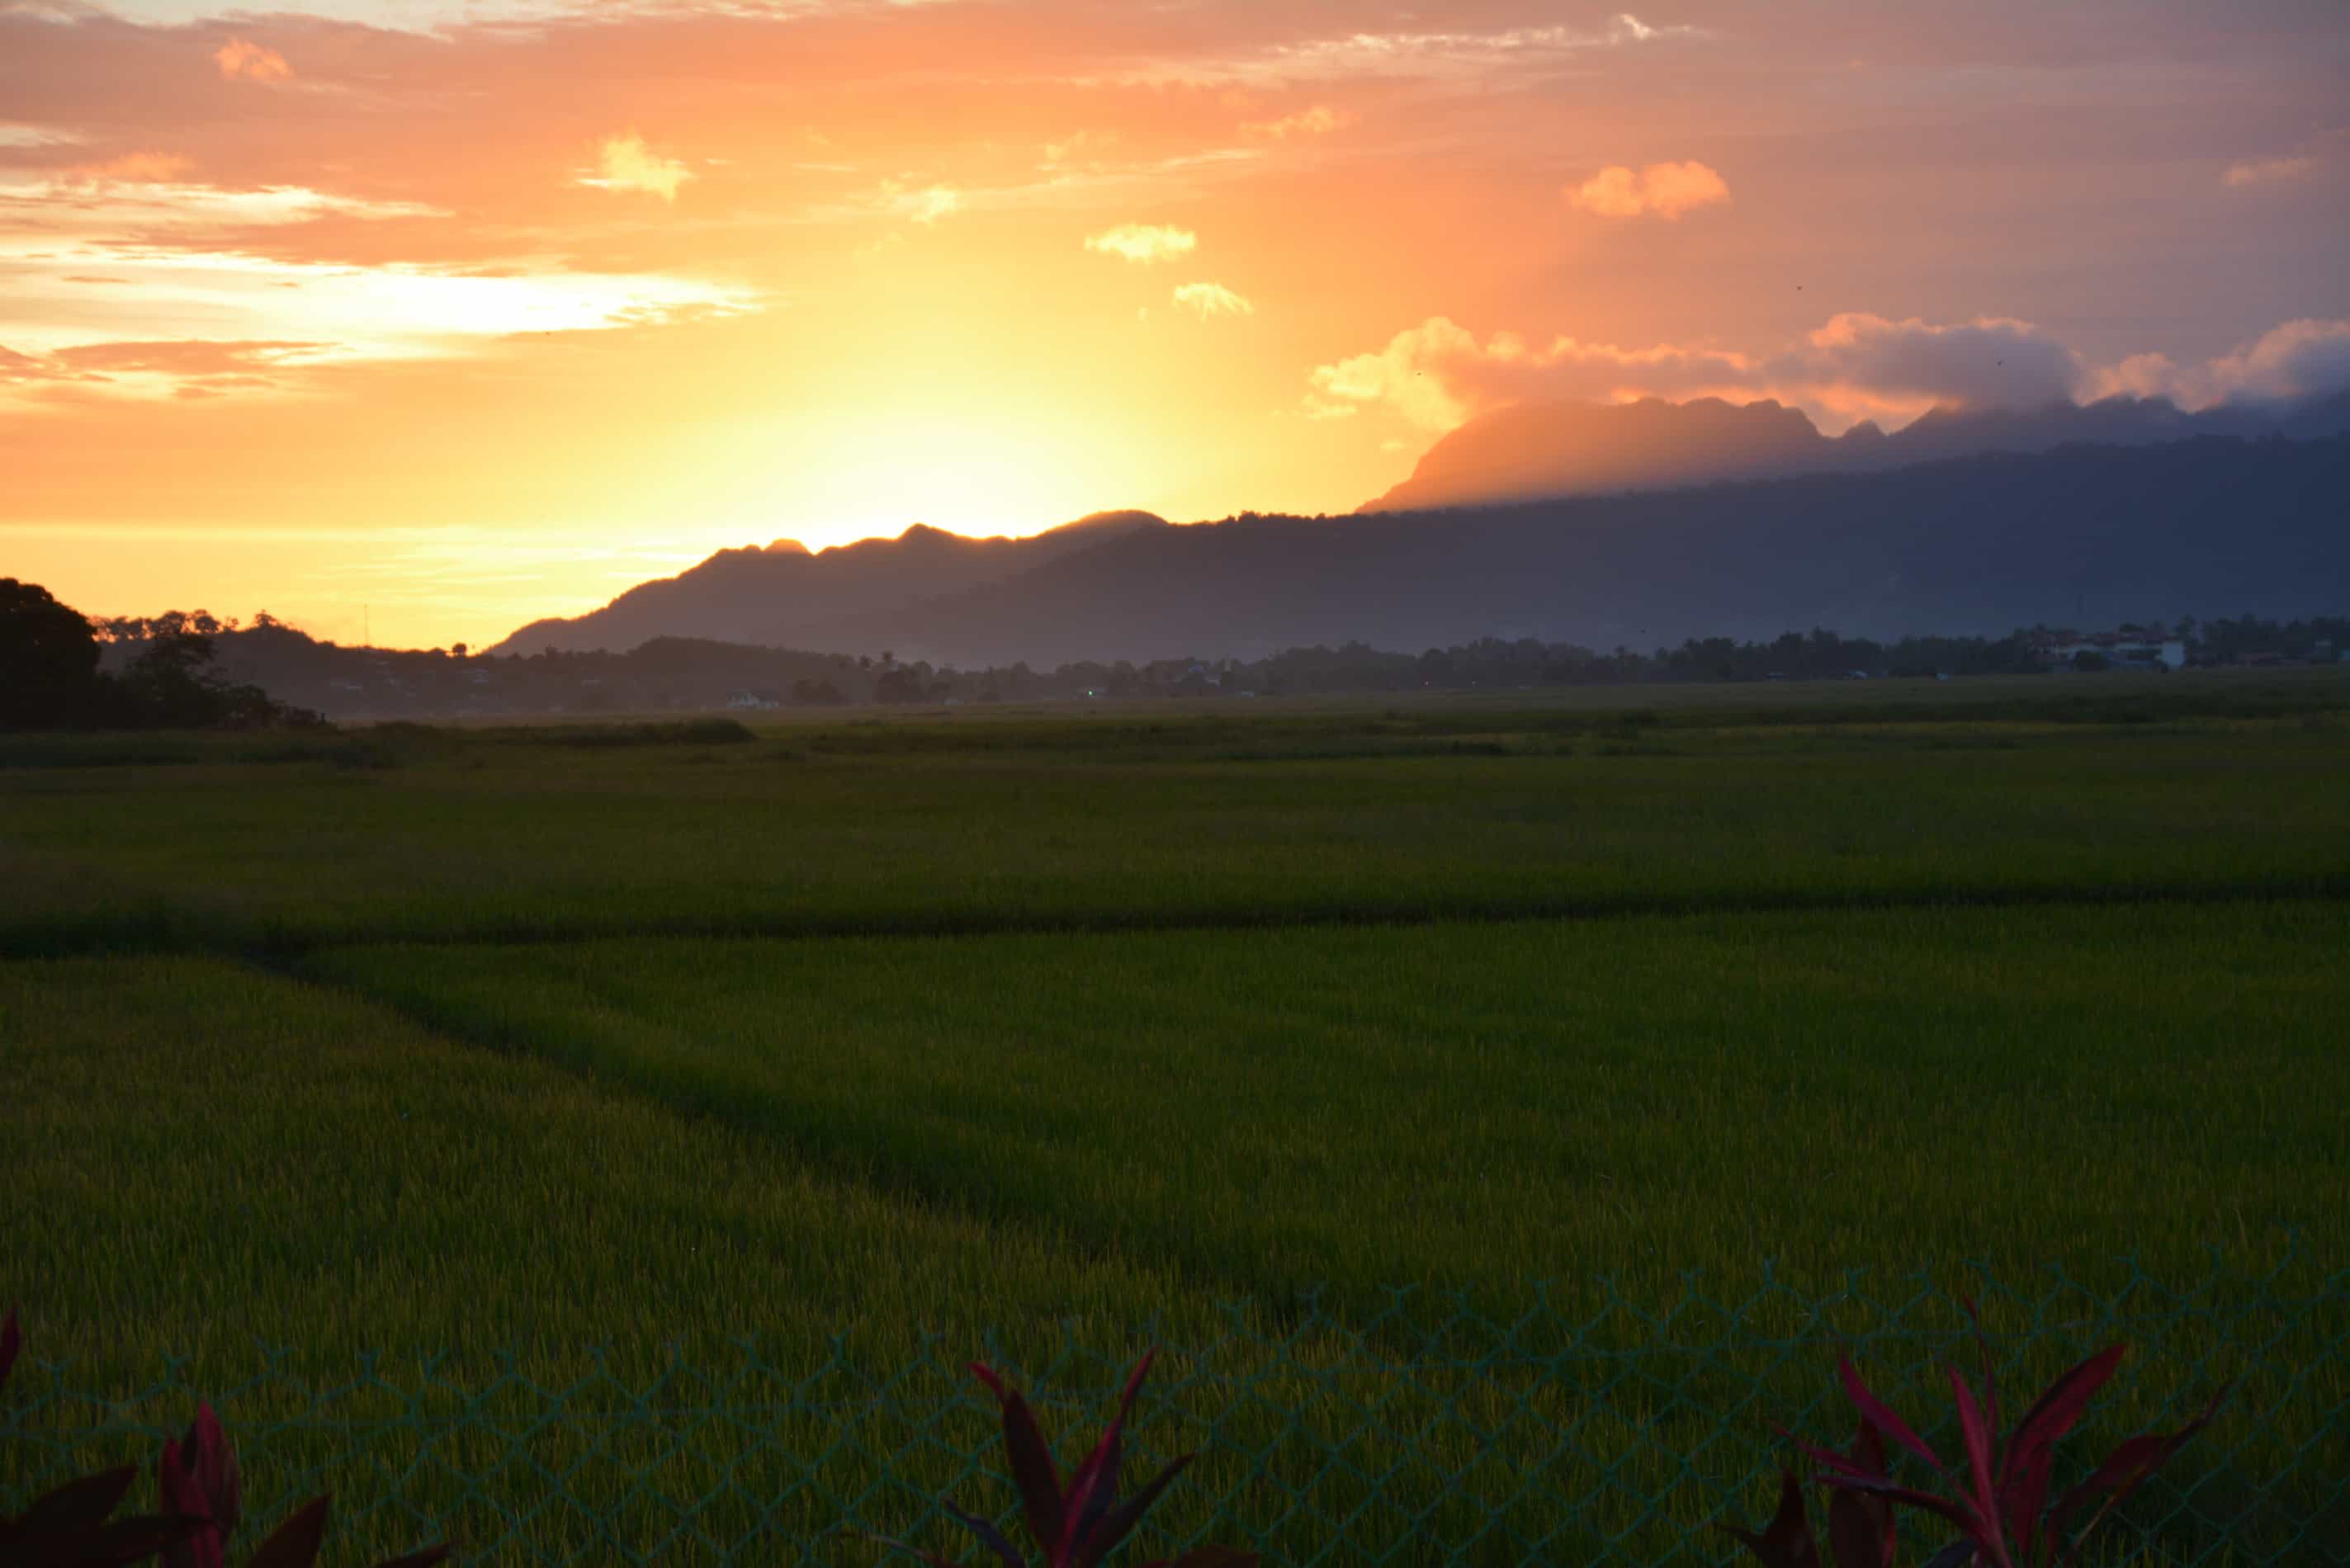 Sunset Valley Holiday Houses - rice paddy sunset